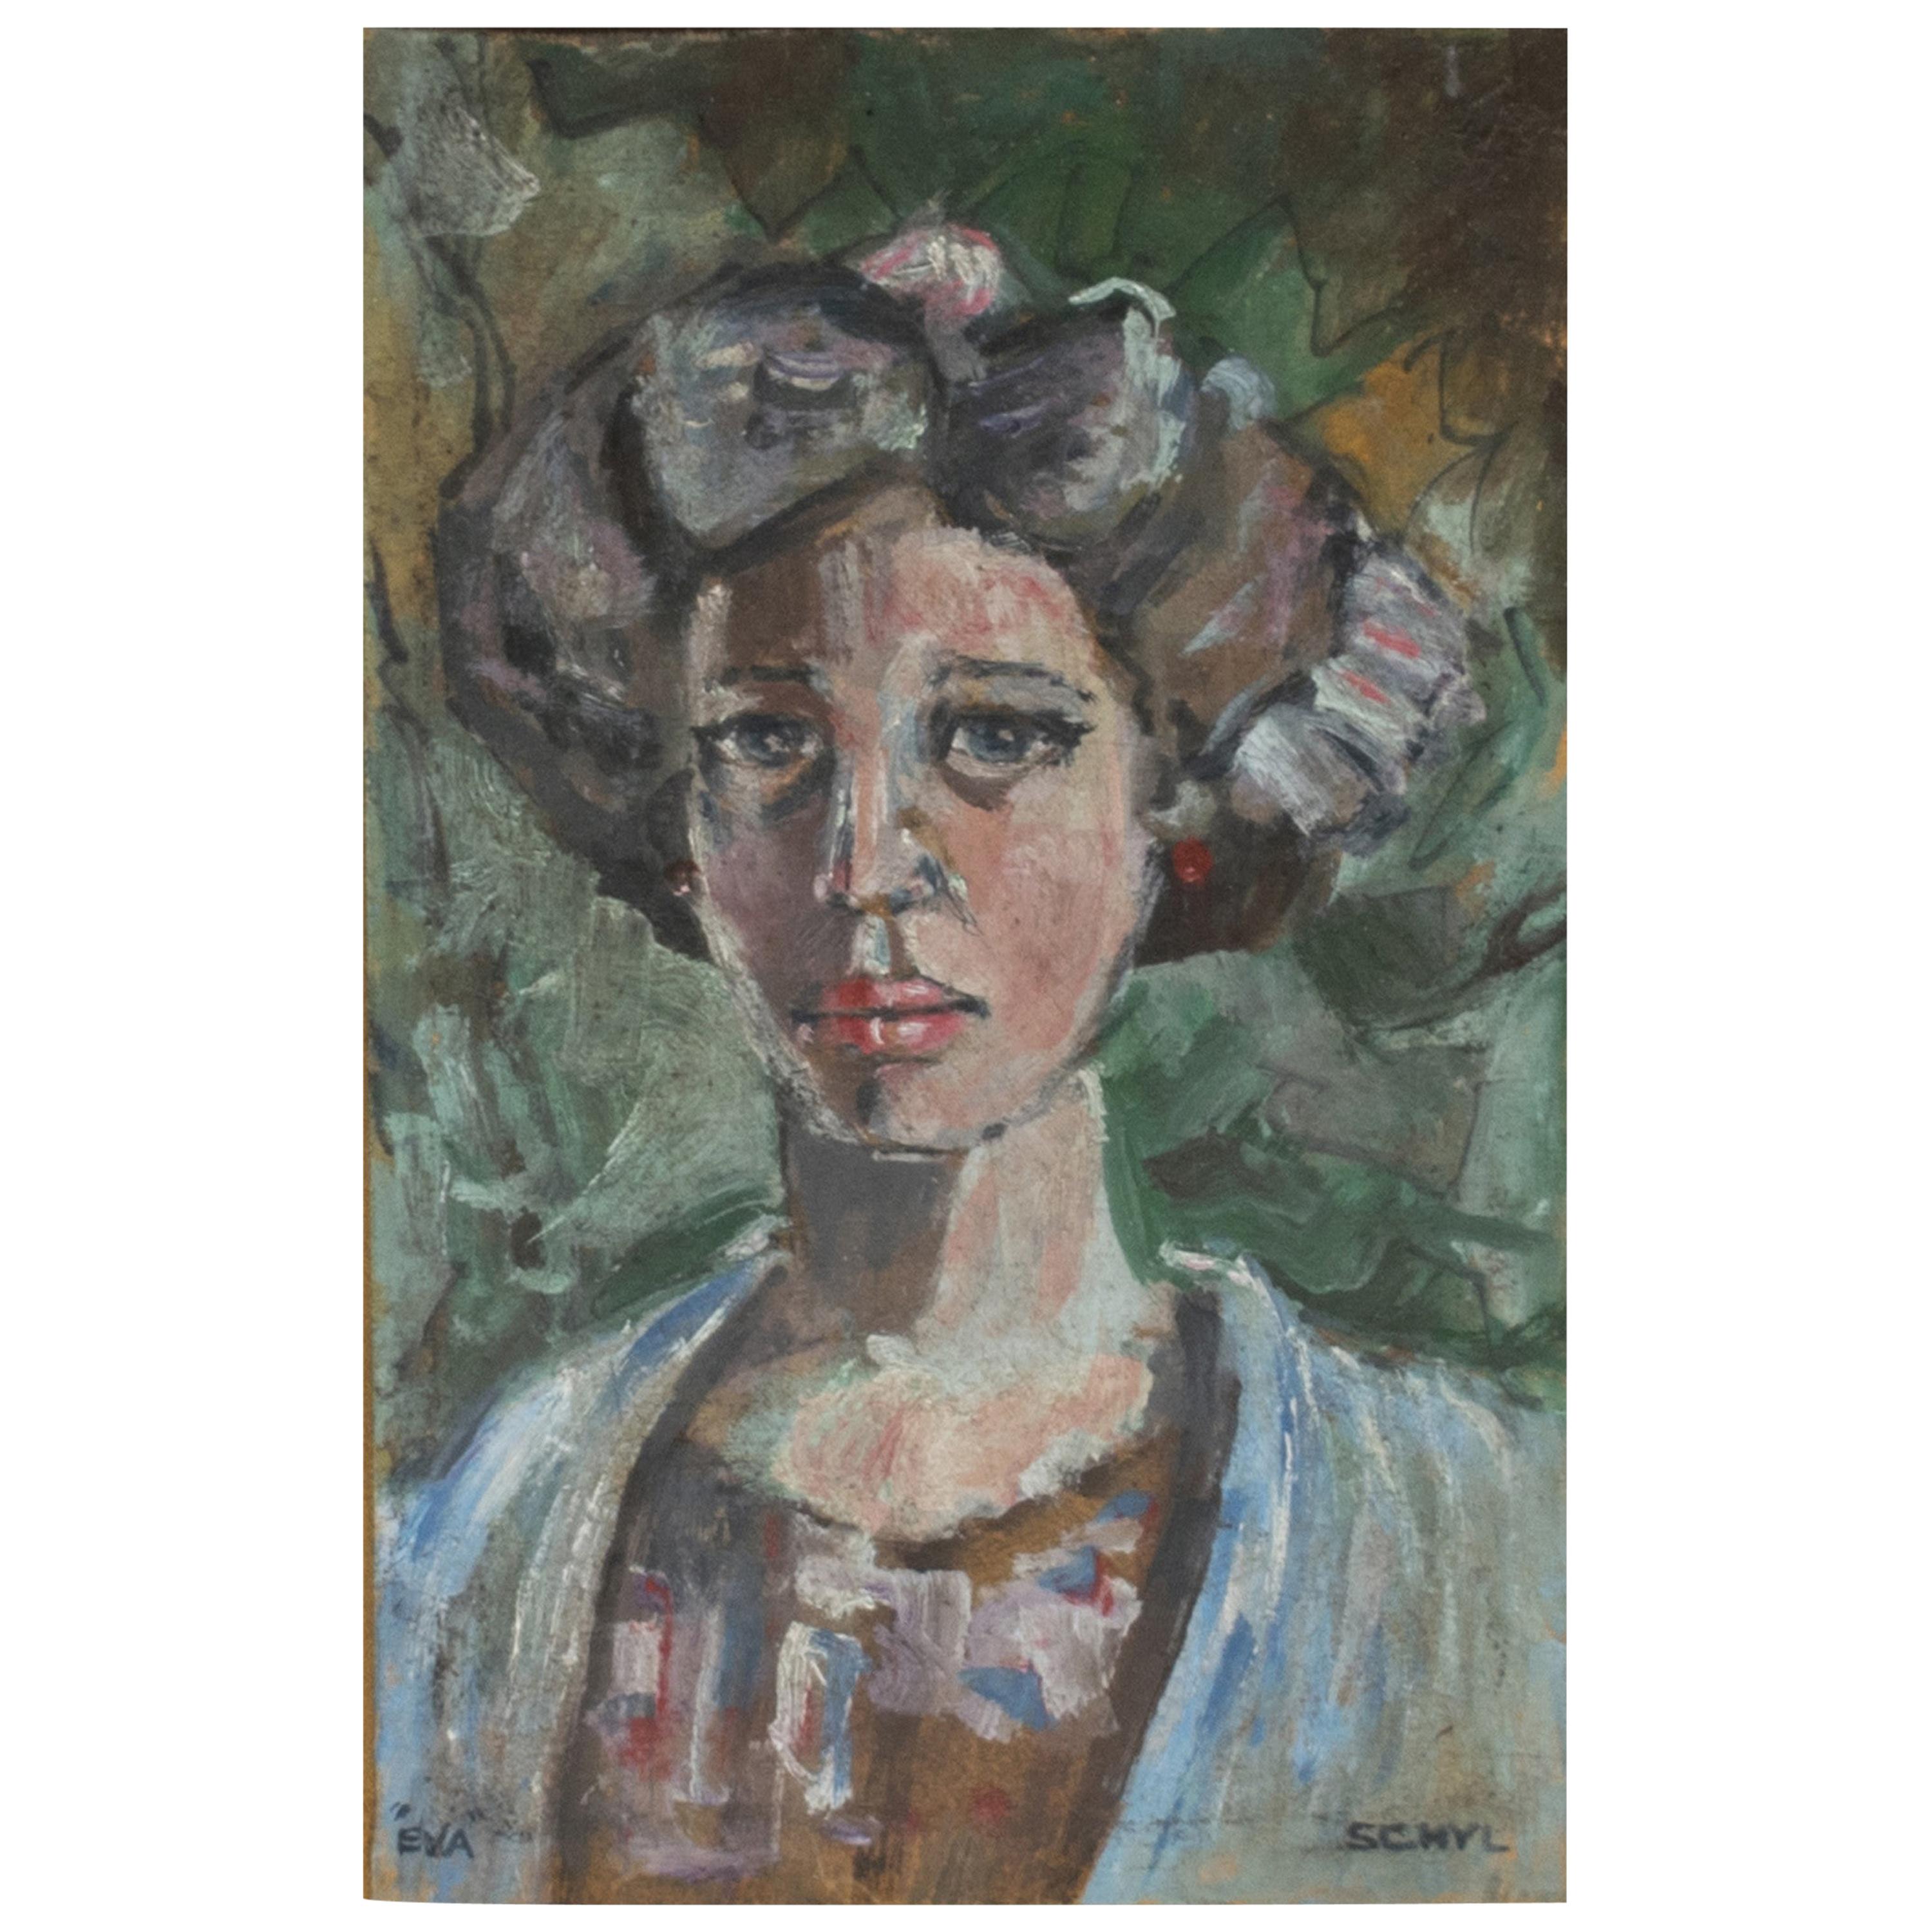 Julius Schyl, Small Painting of a Woman, "Eva" For Sale